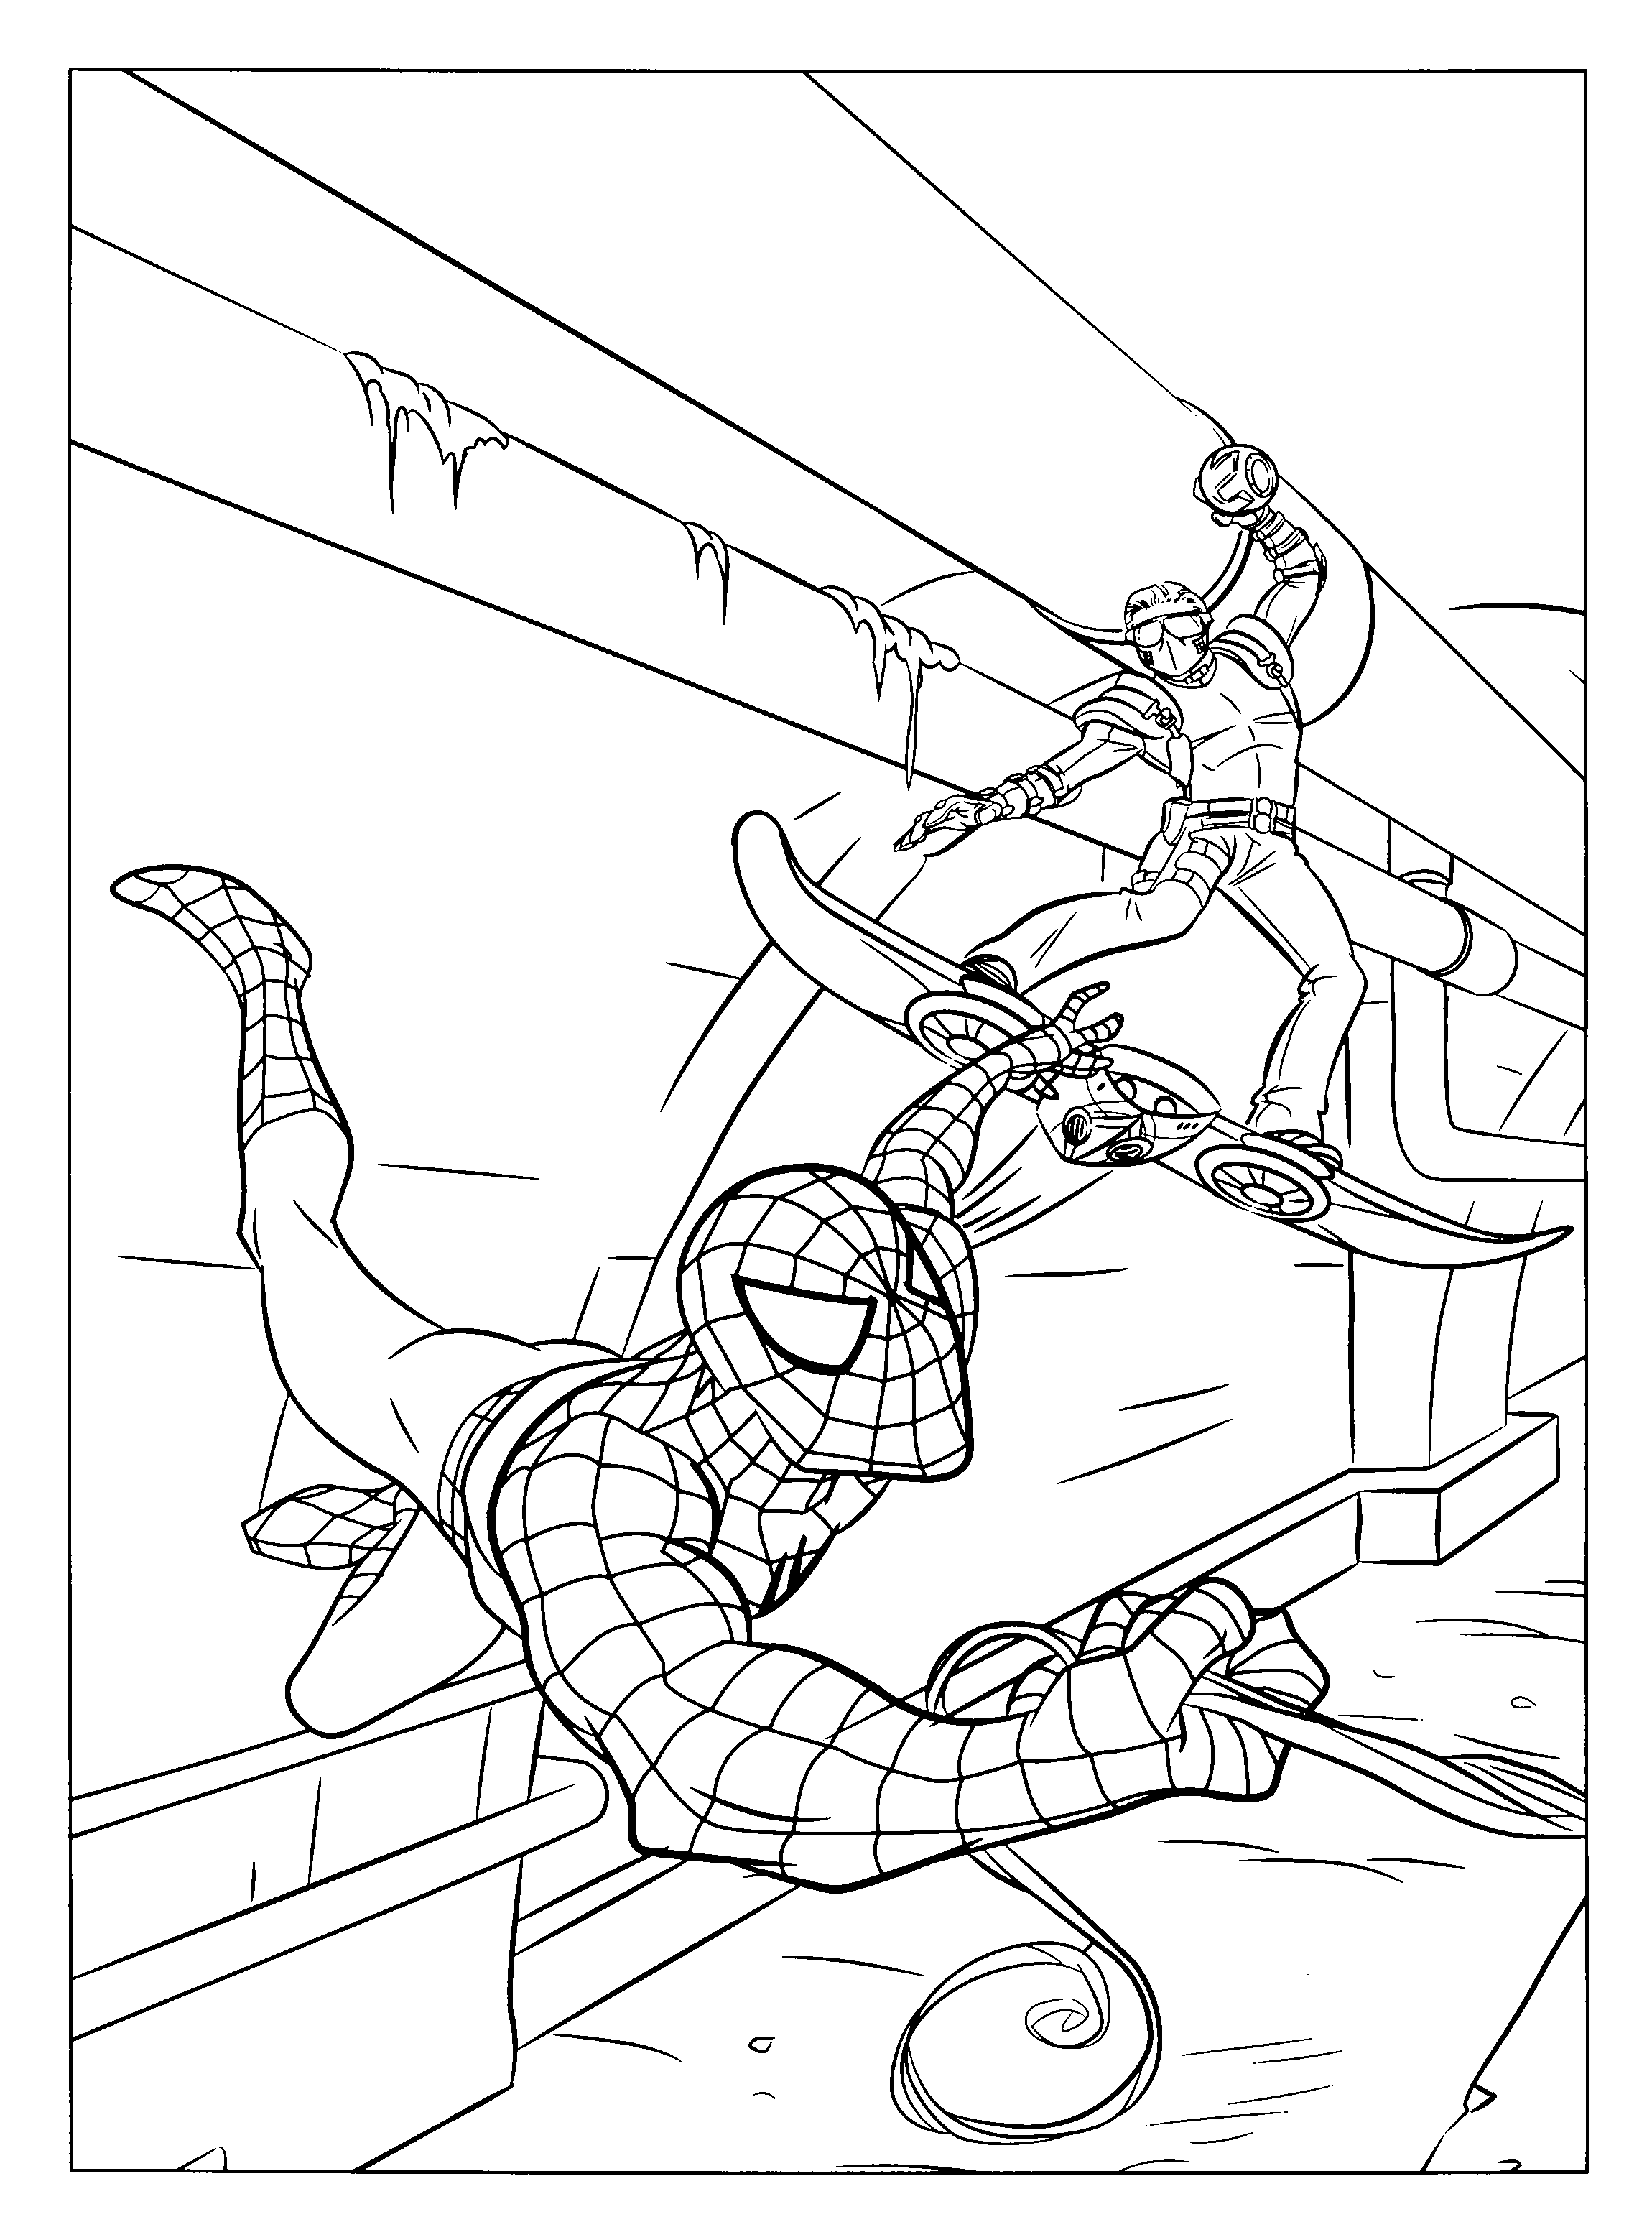 Coloring Page - Spiderman 3 coloring pages 15